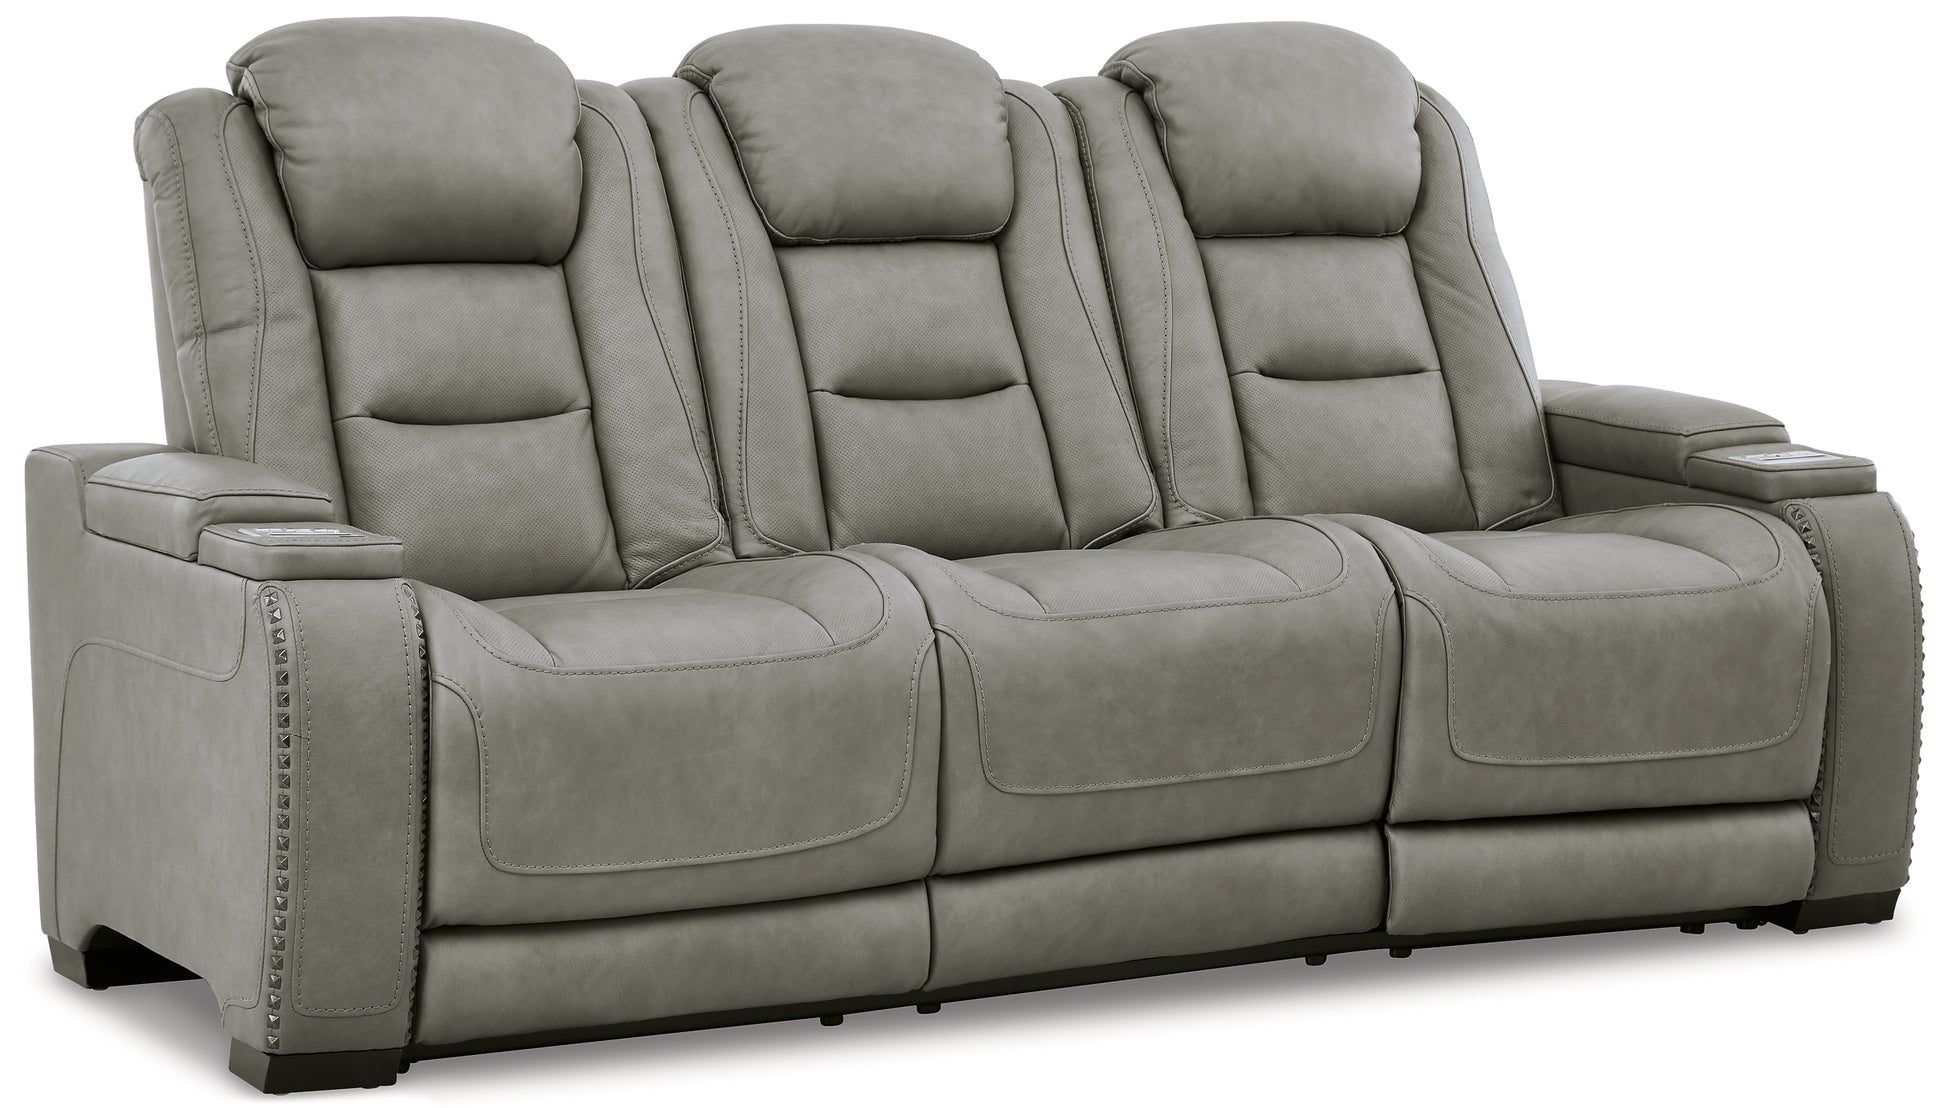 The Man-Den Sofa, Loveseat and Recliner Signature Design by Ashley®